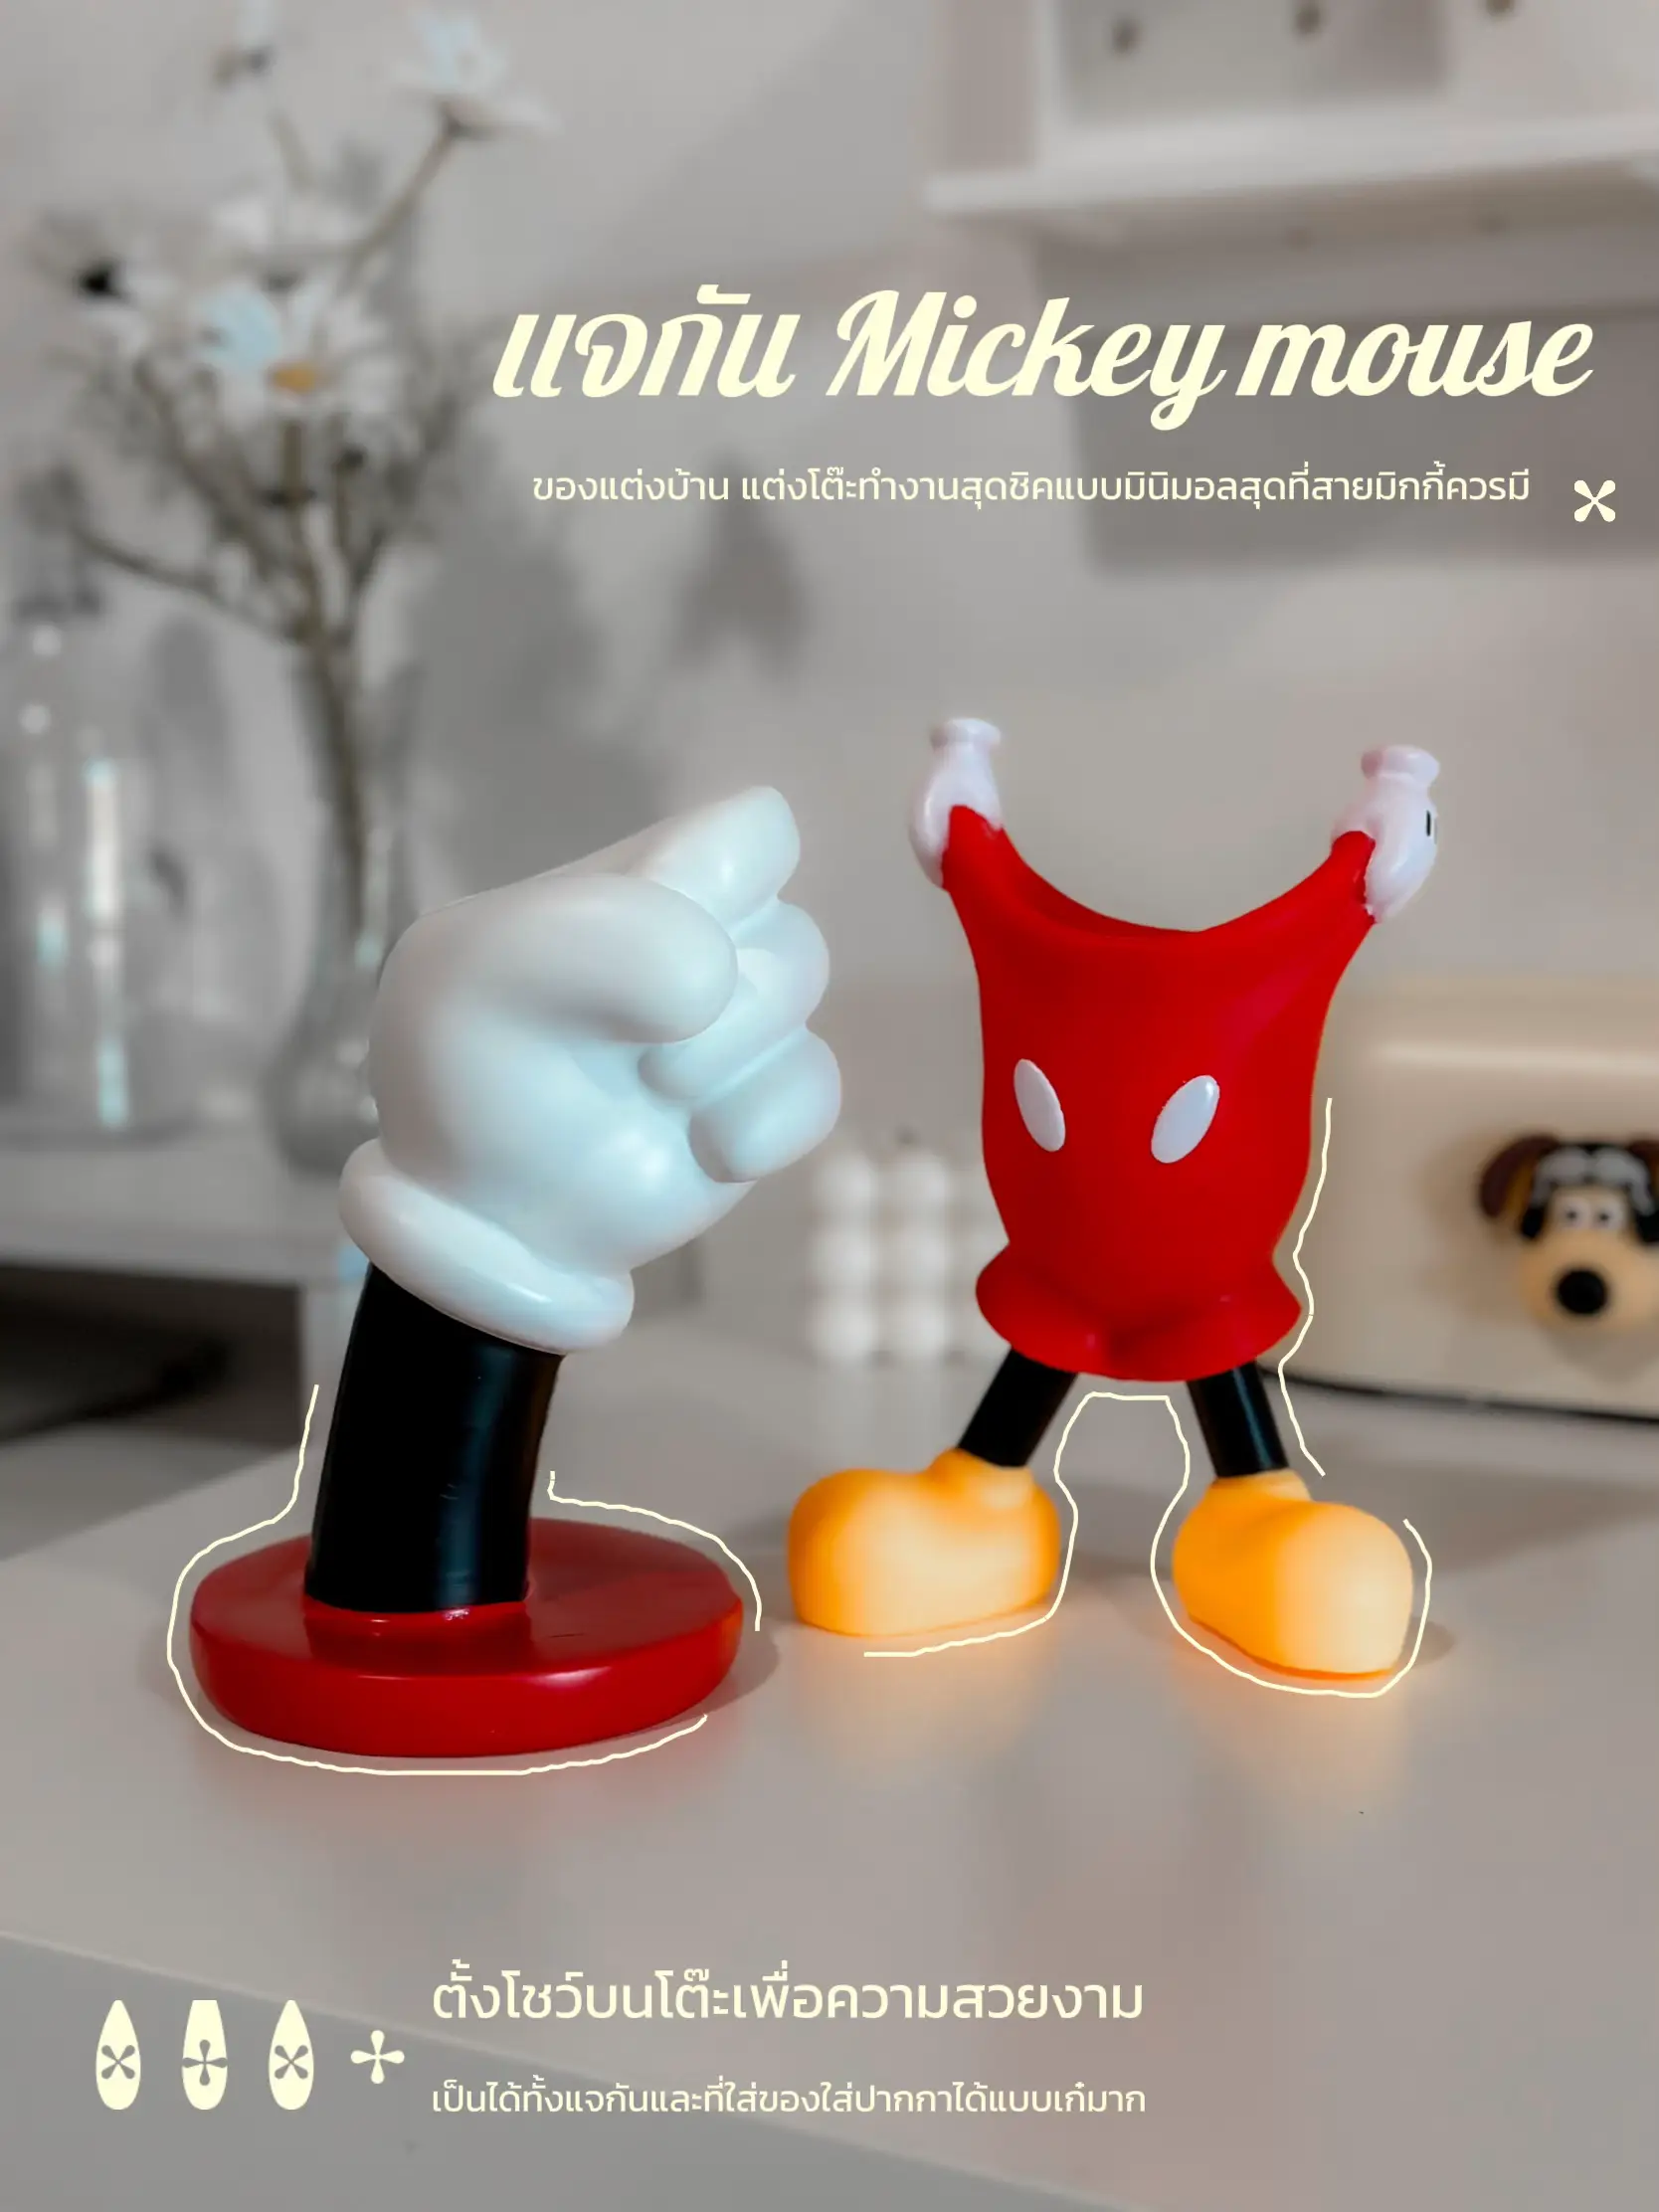 Mickey mouse vase🫶, Gallery posted by อ้อมเองอ้อมเอง♡